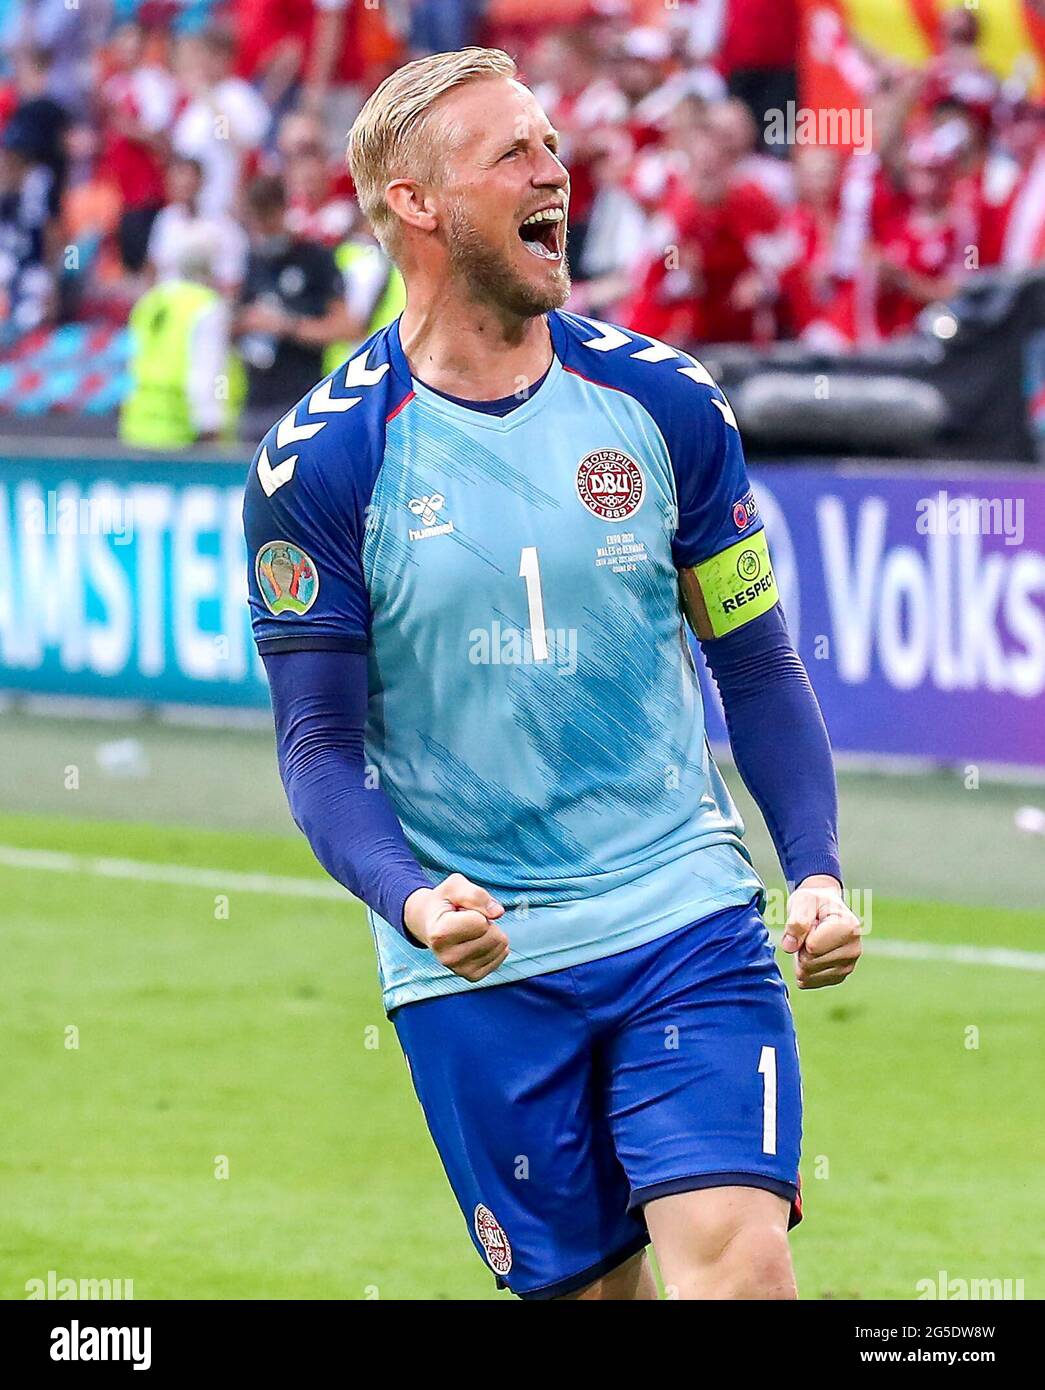 Denmark goalkeeper Kasper Schmeichel celebrates victory after the final whistle during the UEFA Euro 2020 round of 16 match held at the Johan Cruijff ArenA in Amsterdam, Netherlands. Picture date: Saturday June 26, 2021. Stock Photo